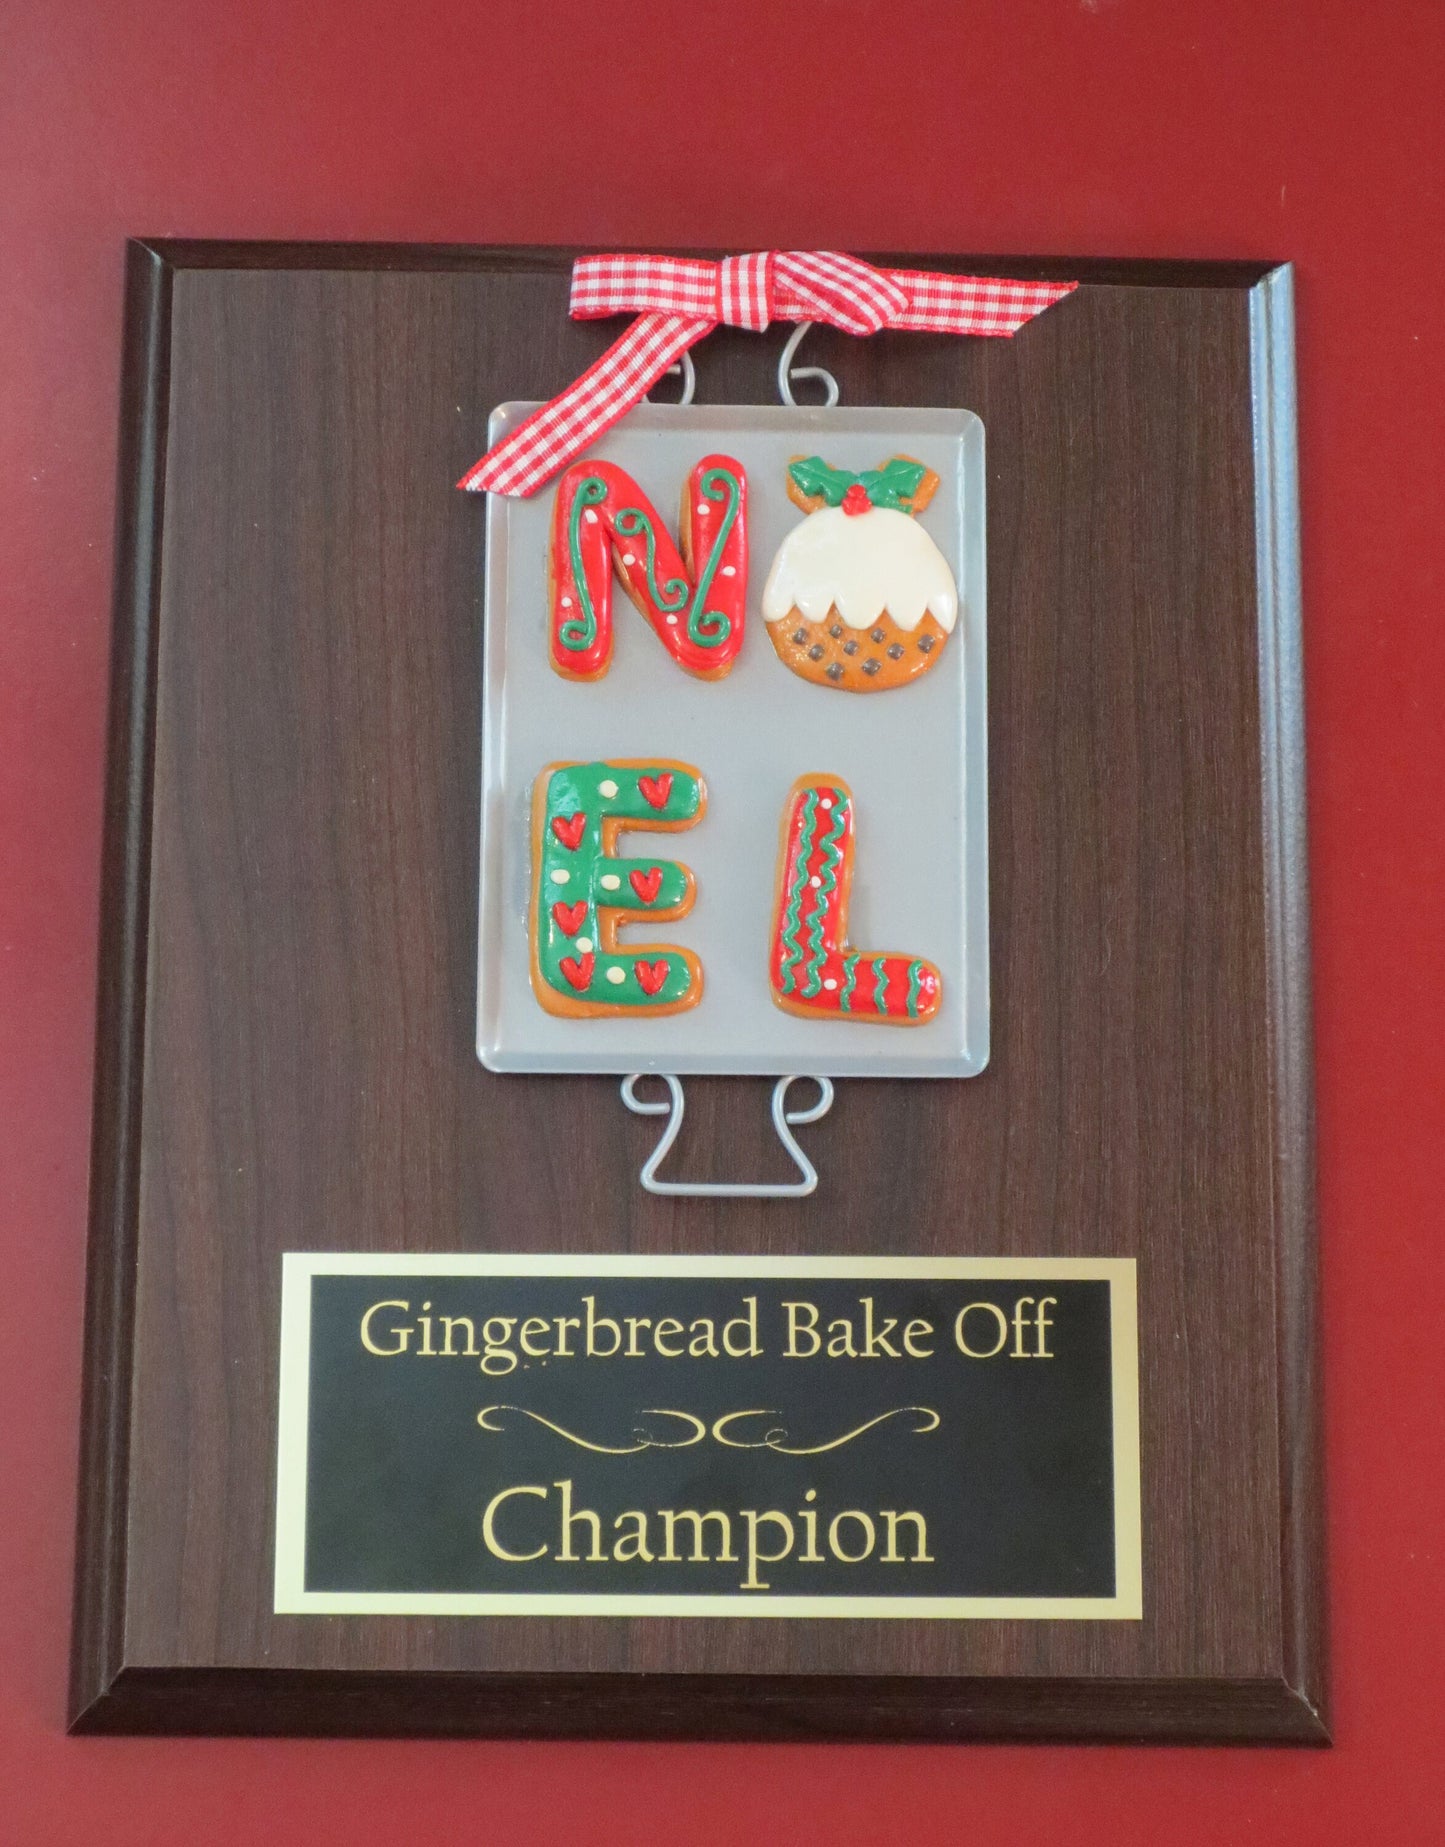 Gingerbread Cookie Bake Off Christmas Trophy Contest Decorating Winner Cookie Baking Sheet Gingerbread House Christmas Decor Ugly Sweater